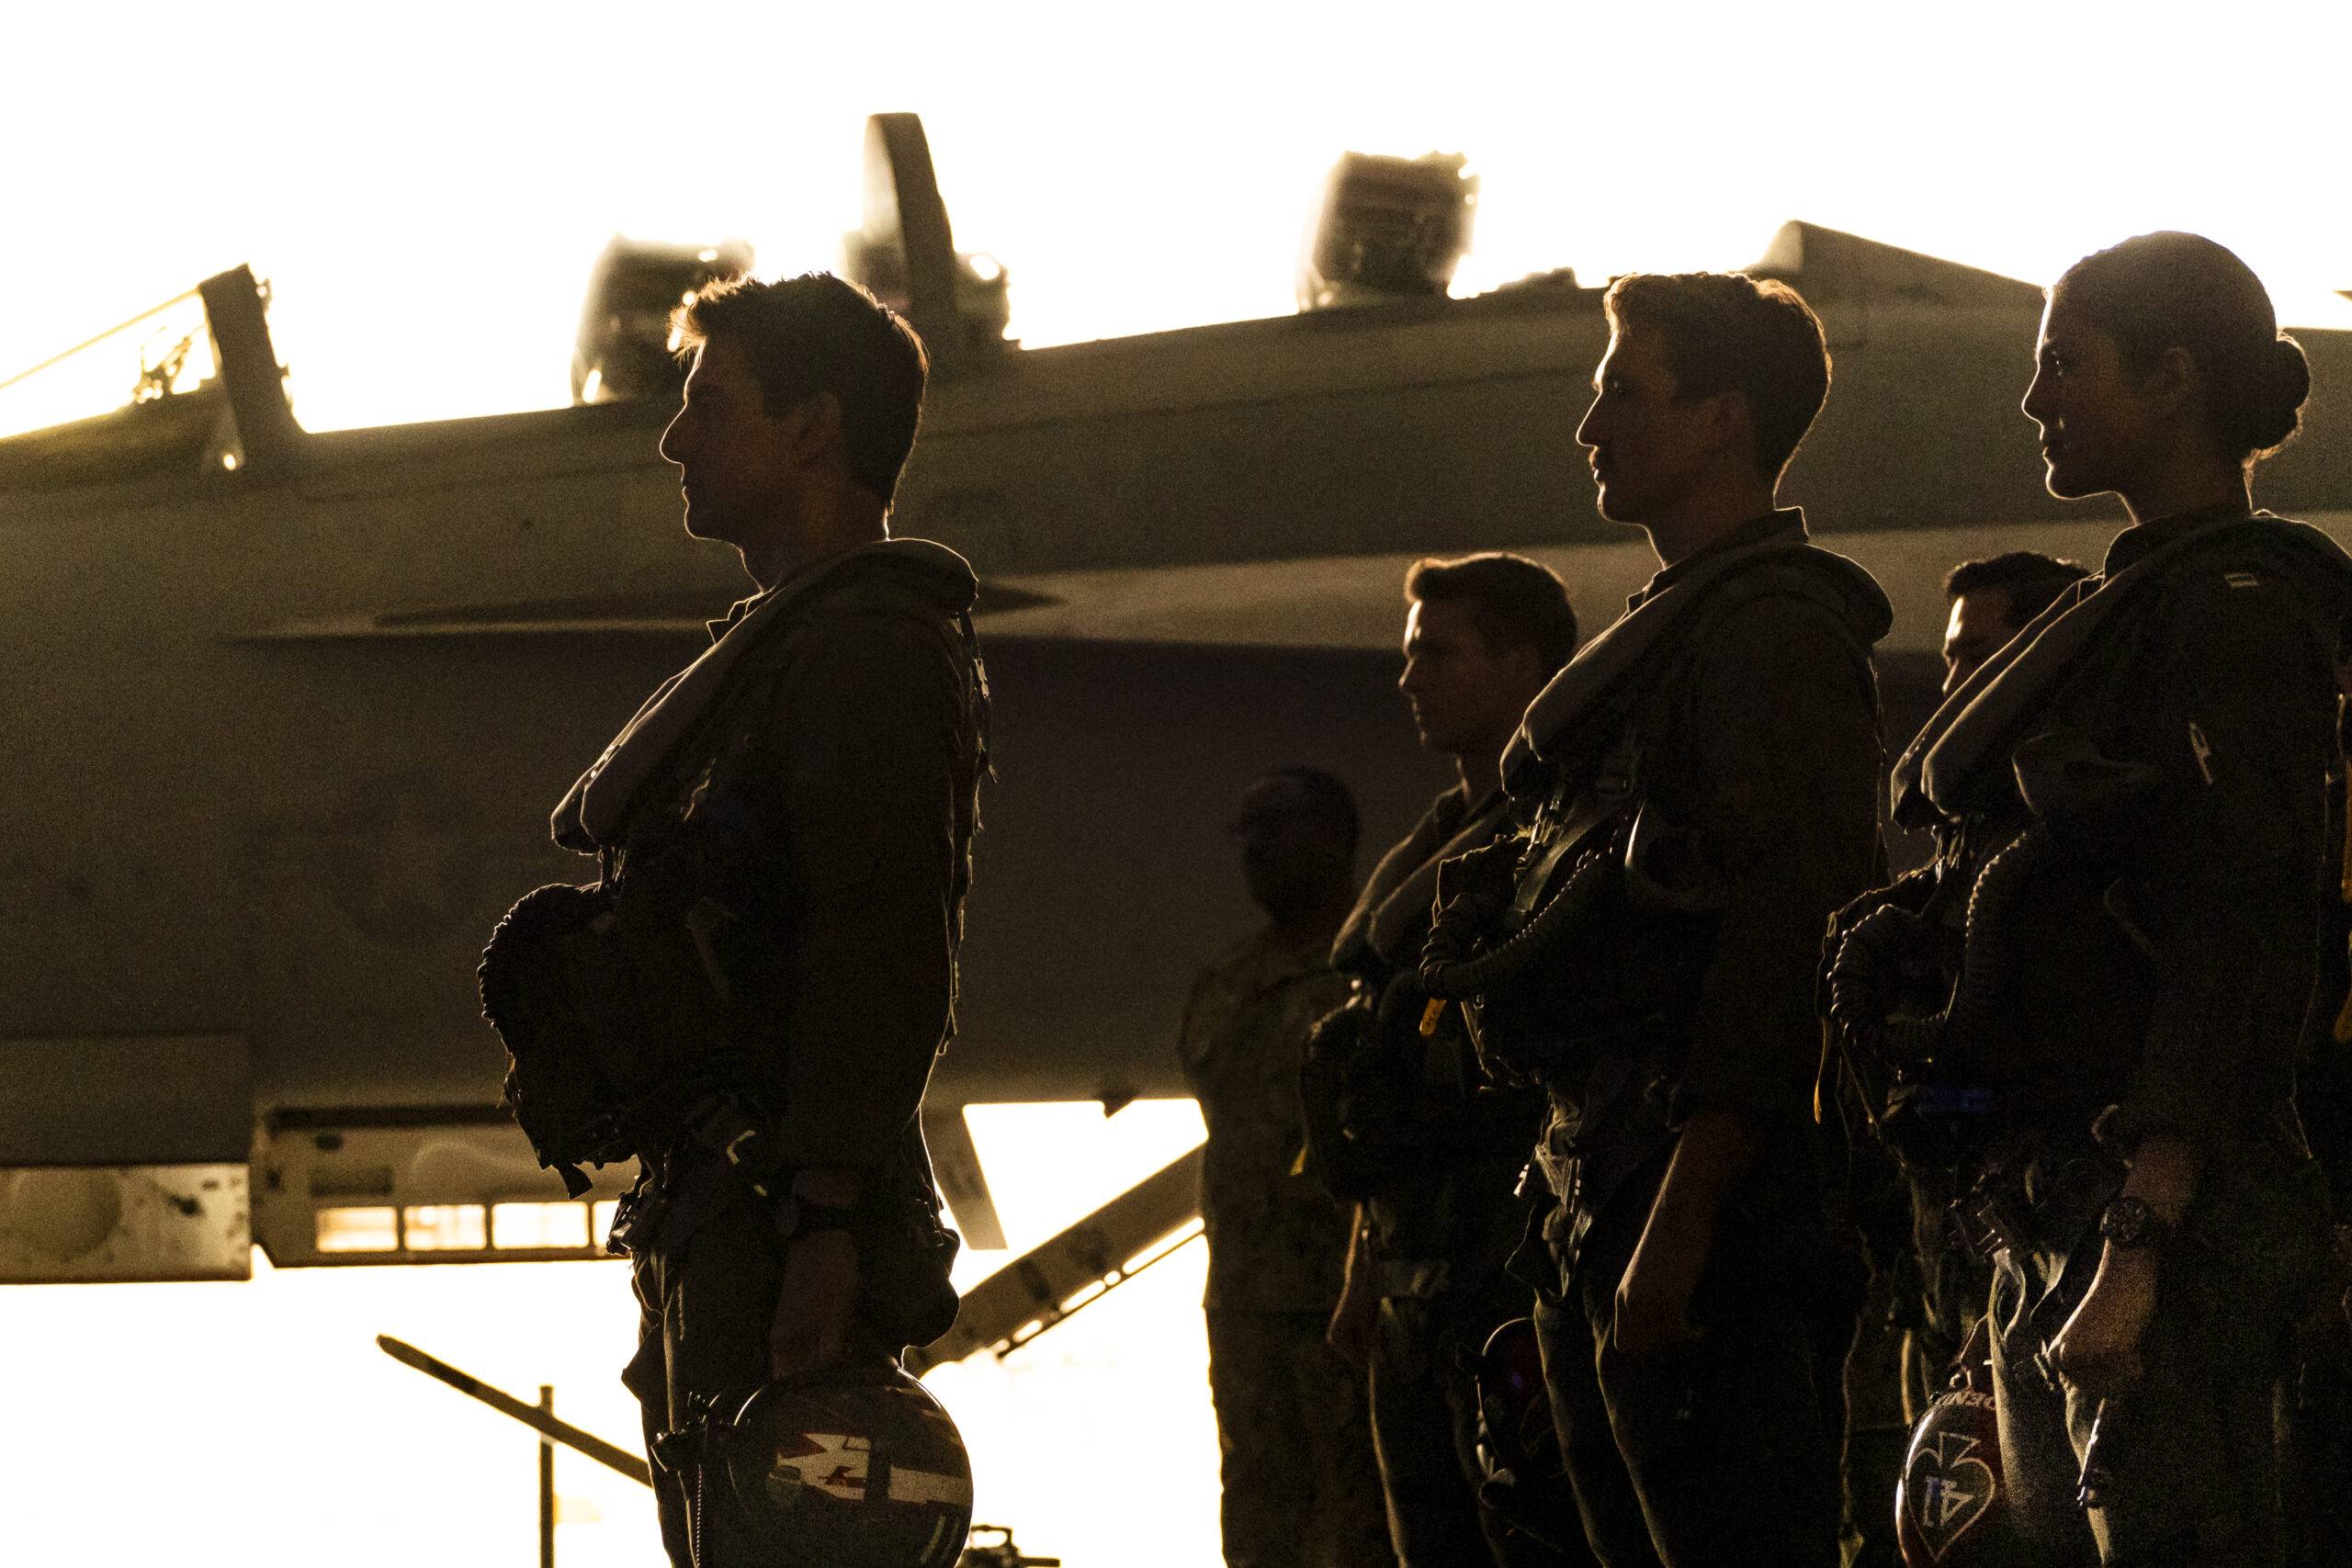 Silhouettes of five fighter pilots from the side. Tom Cruise stands in front, the other four behind him. There is a jet in the background.